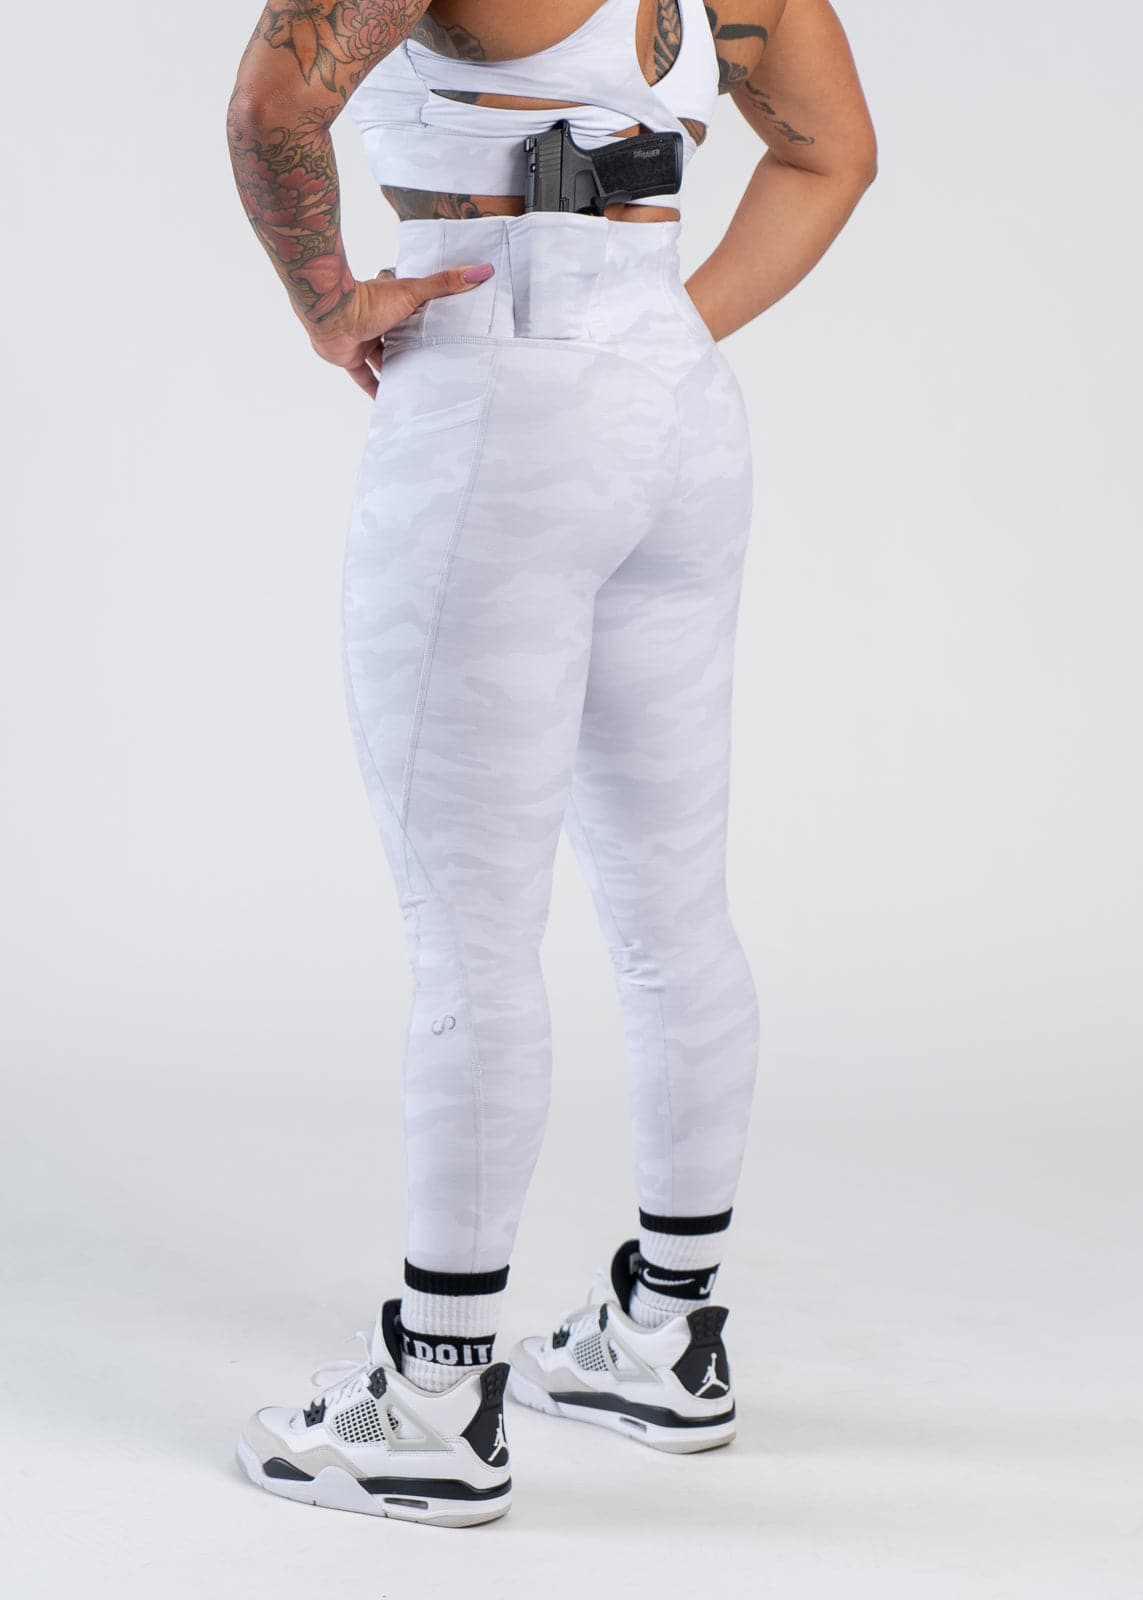 Concealed Carry Leggings With Pockets Shoulders Down 3/4 Back View with Hands on Sides | Snow Camo